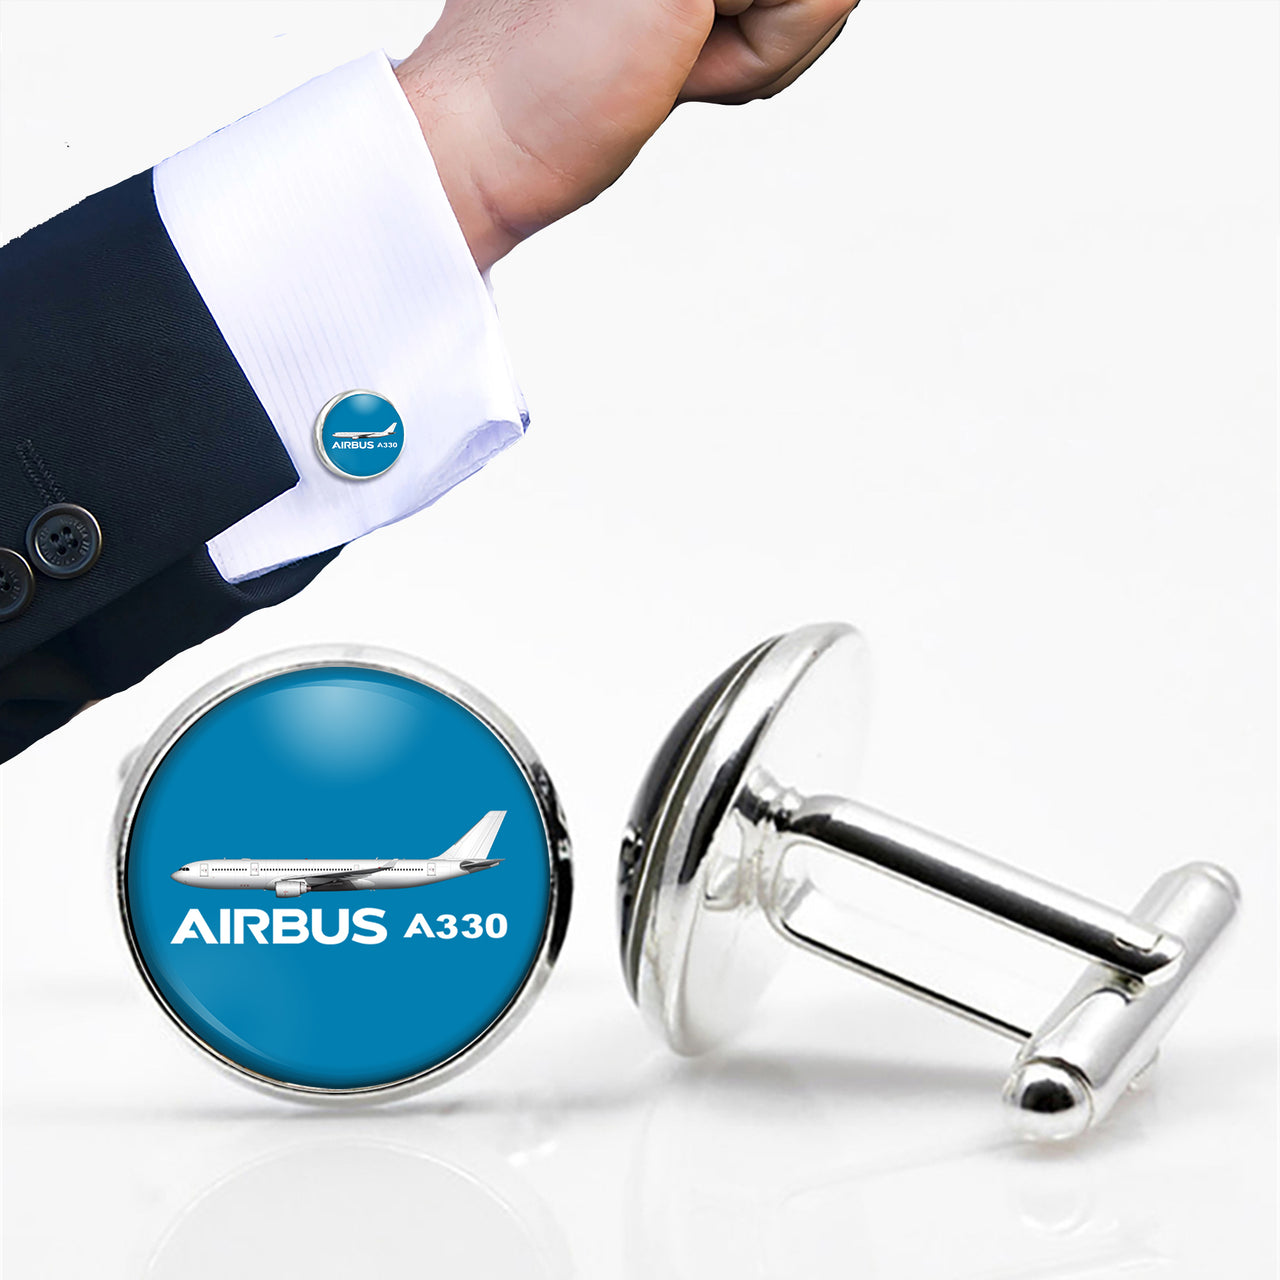 The Airbus A330 Designed Cuff Links